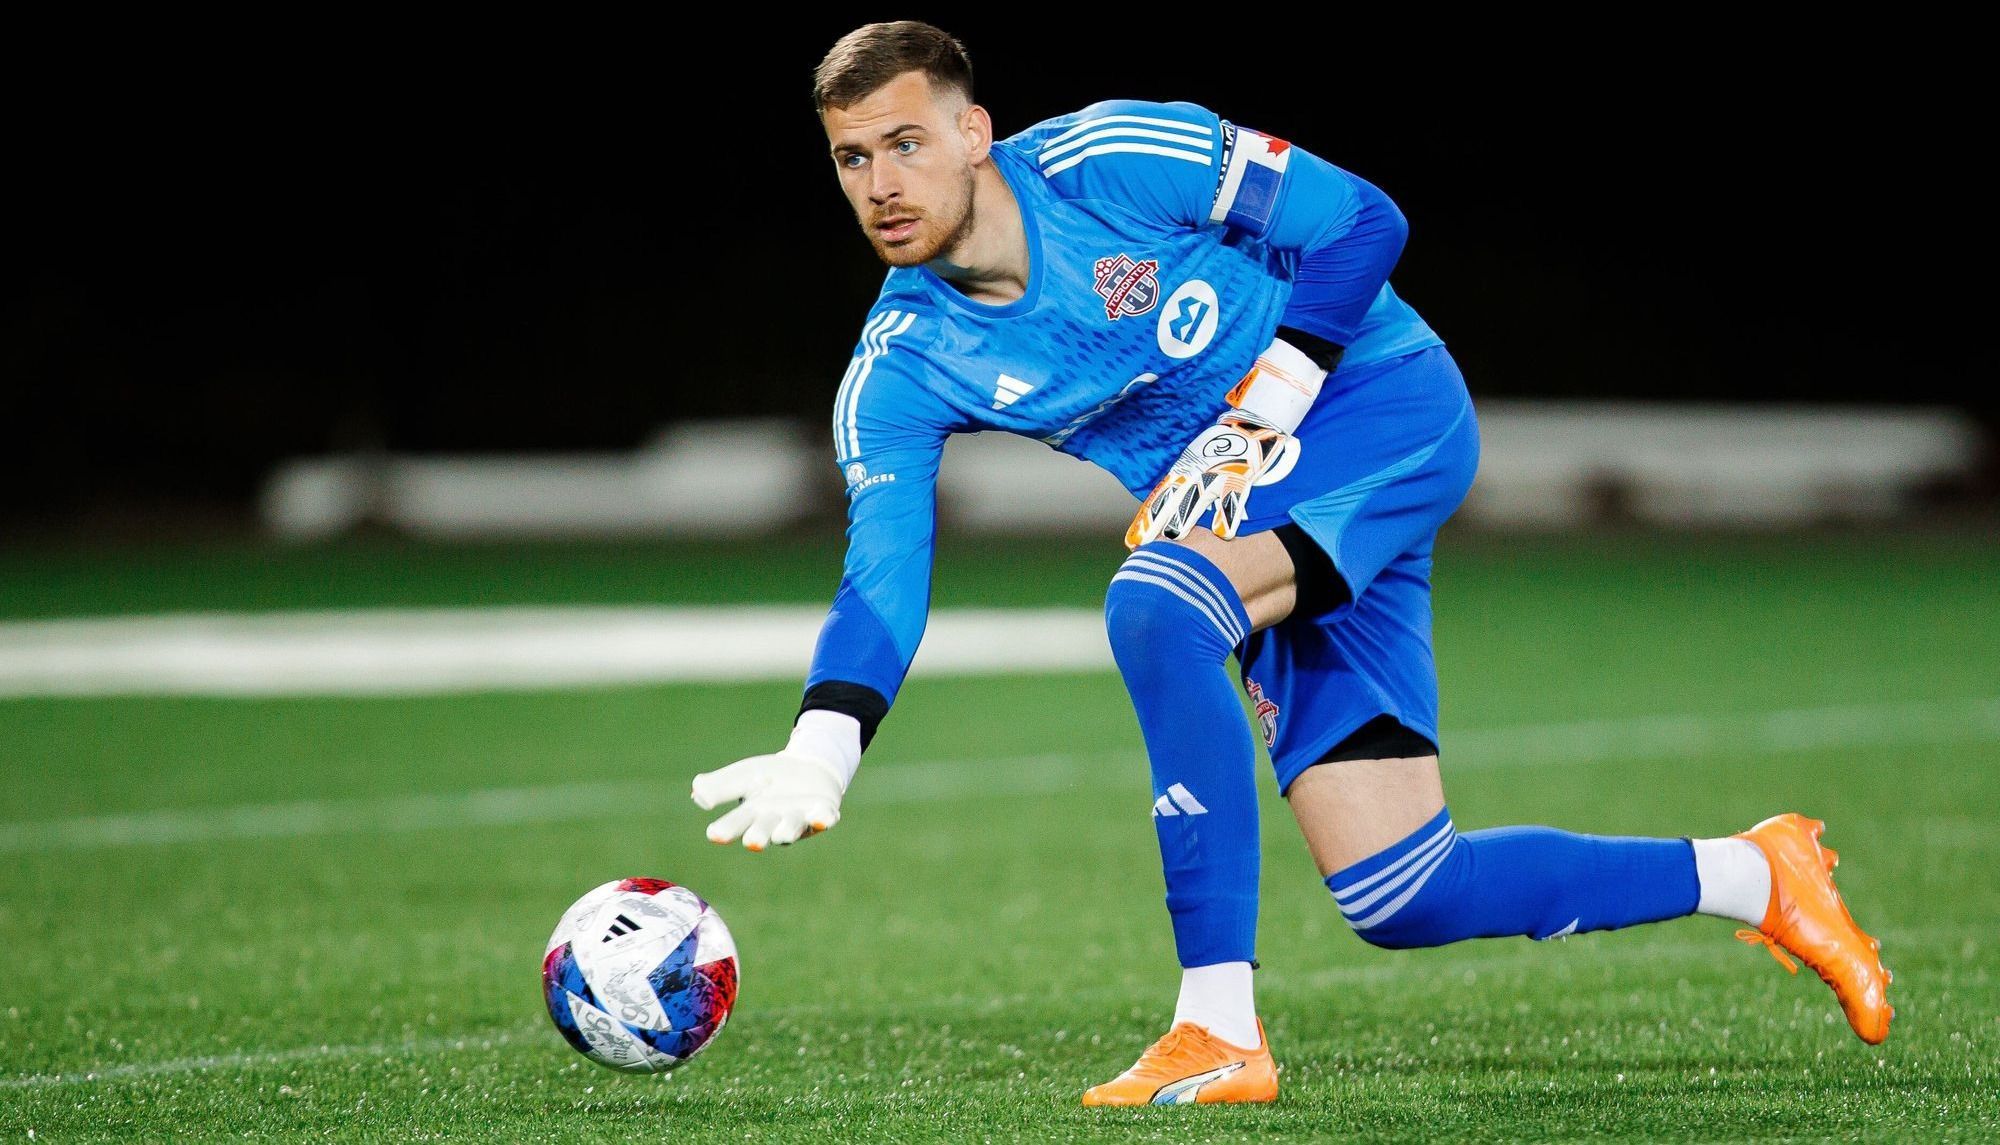 Toronto FC signs goalkeeper Quentin Westberg